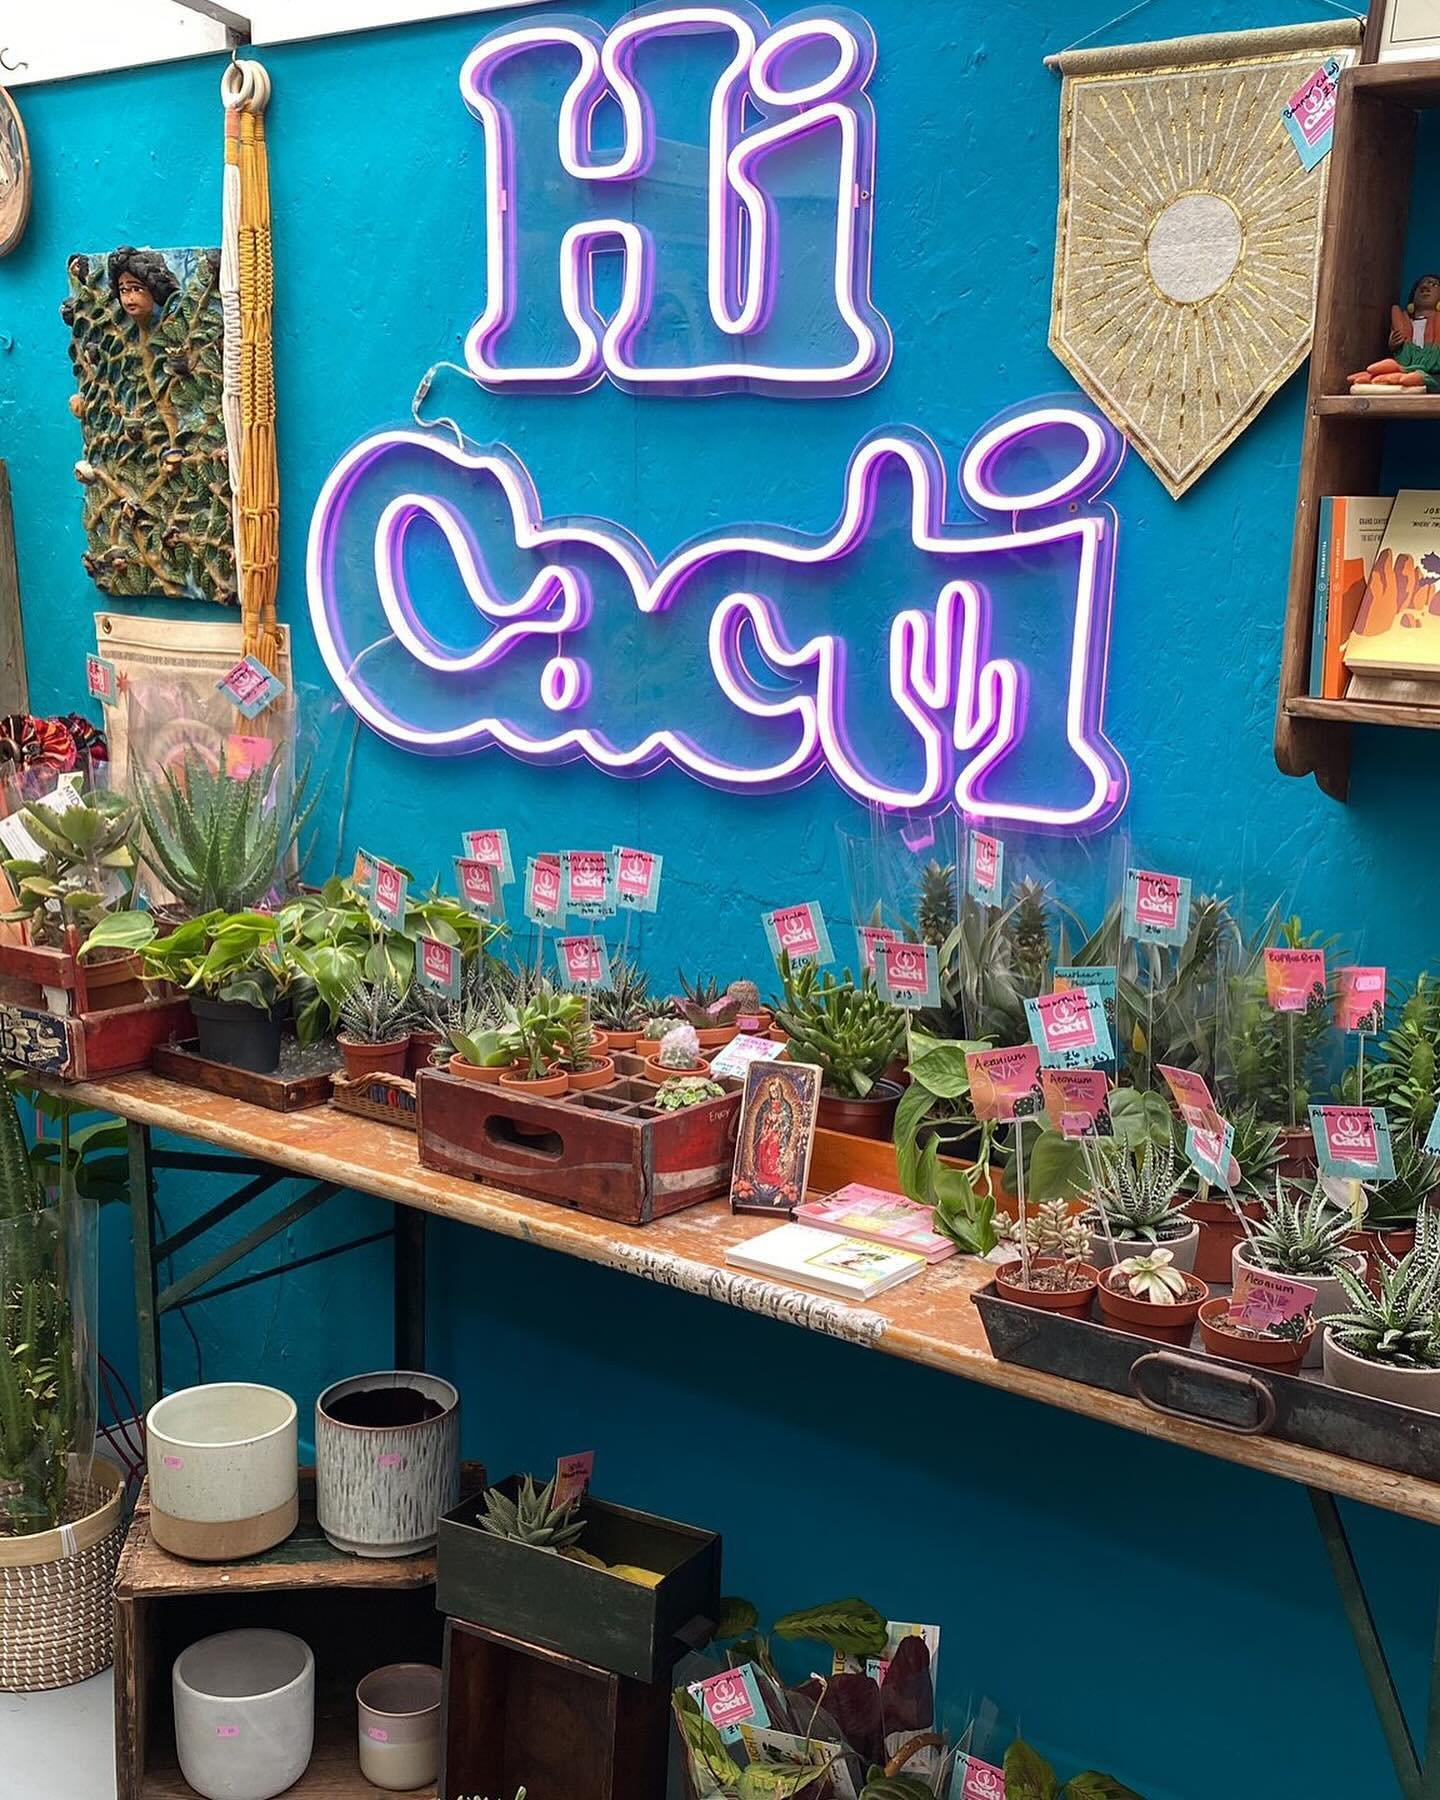 Have you checked out our wonderful new Flock member yet!?

We are so pleased to introduce @hi_cacti 
Founded by Sabina, a native Austinite from Texas back in 2015, Hi Cacti is a colourful mix of home goods, gifts and desert plants inspired by her Sou